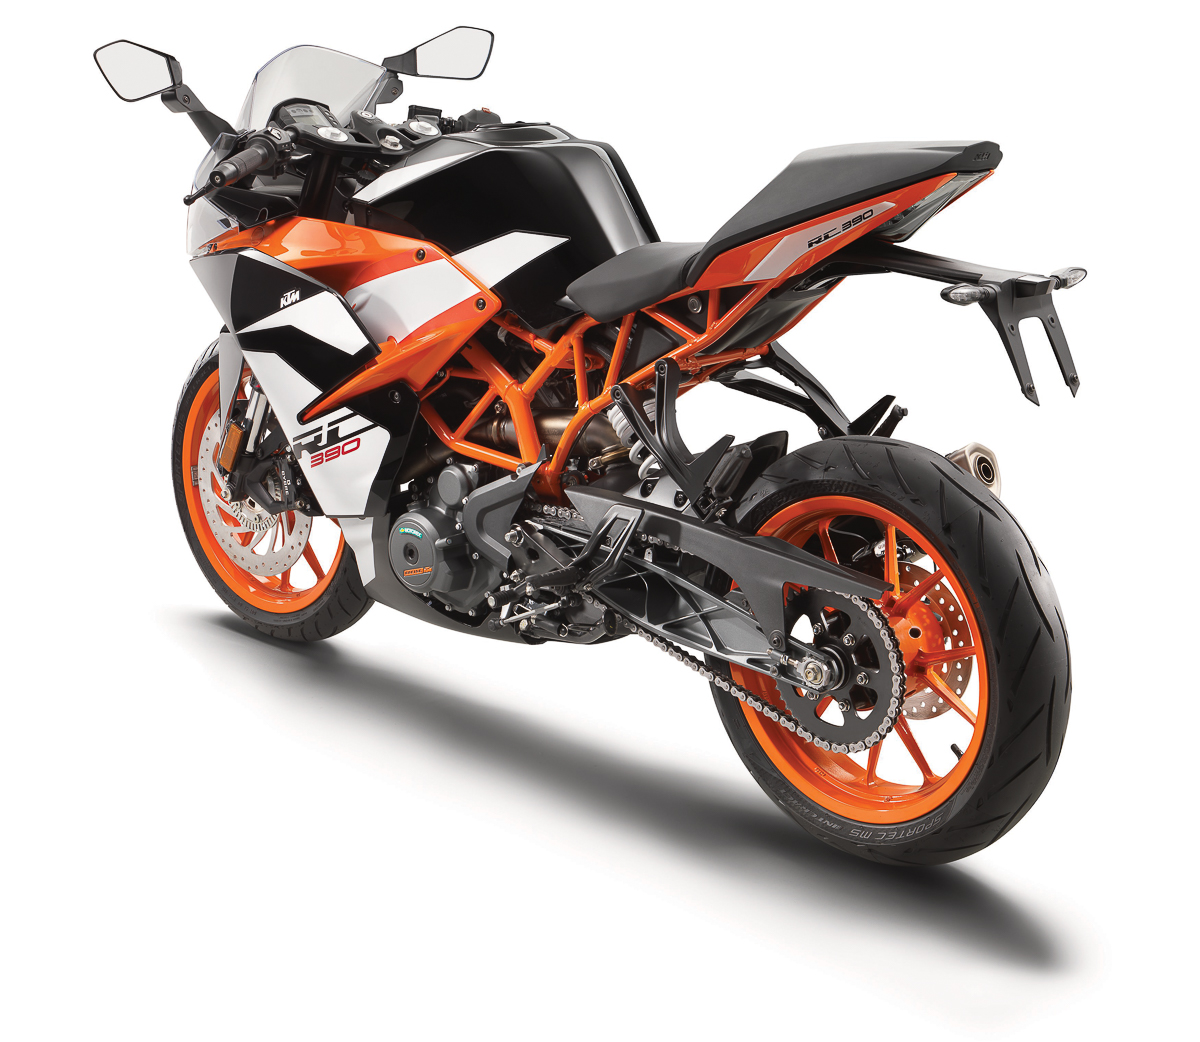 KTM to launch RC 390 and RC 200 on 19th January 2017 in 